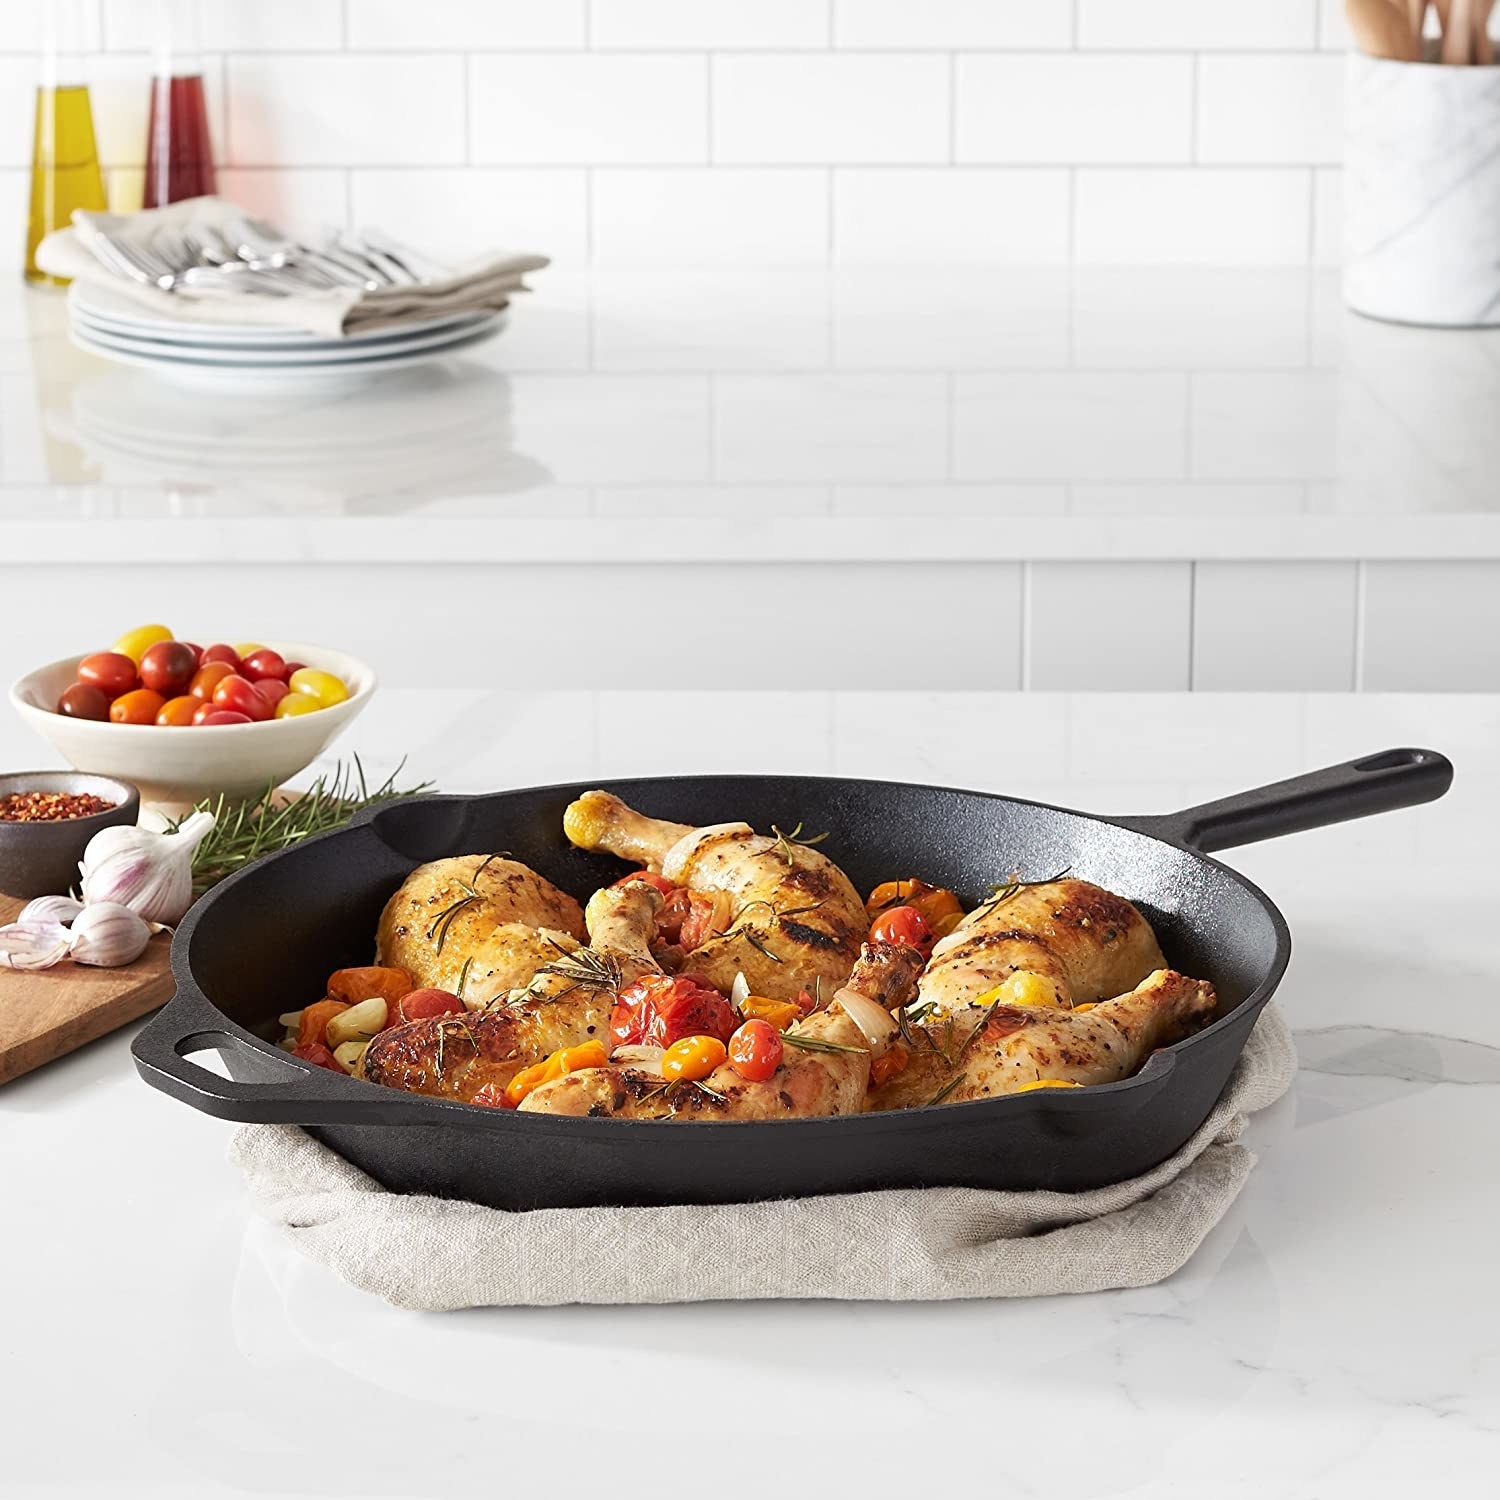 Food in a cast iron skillet